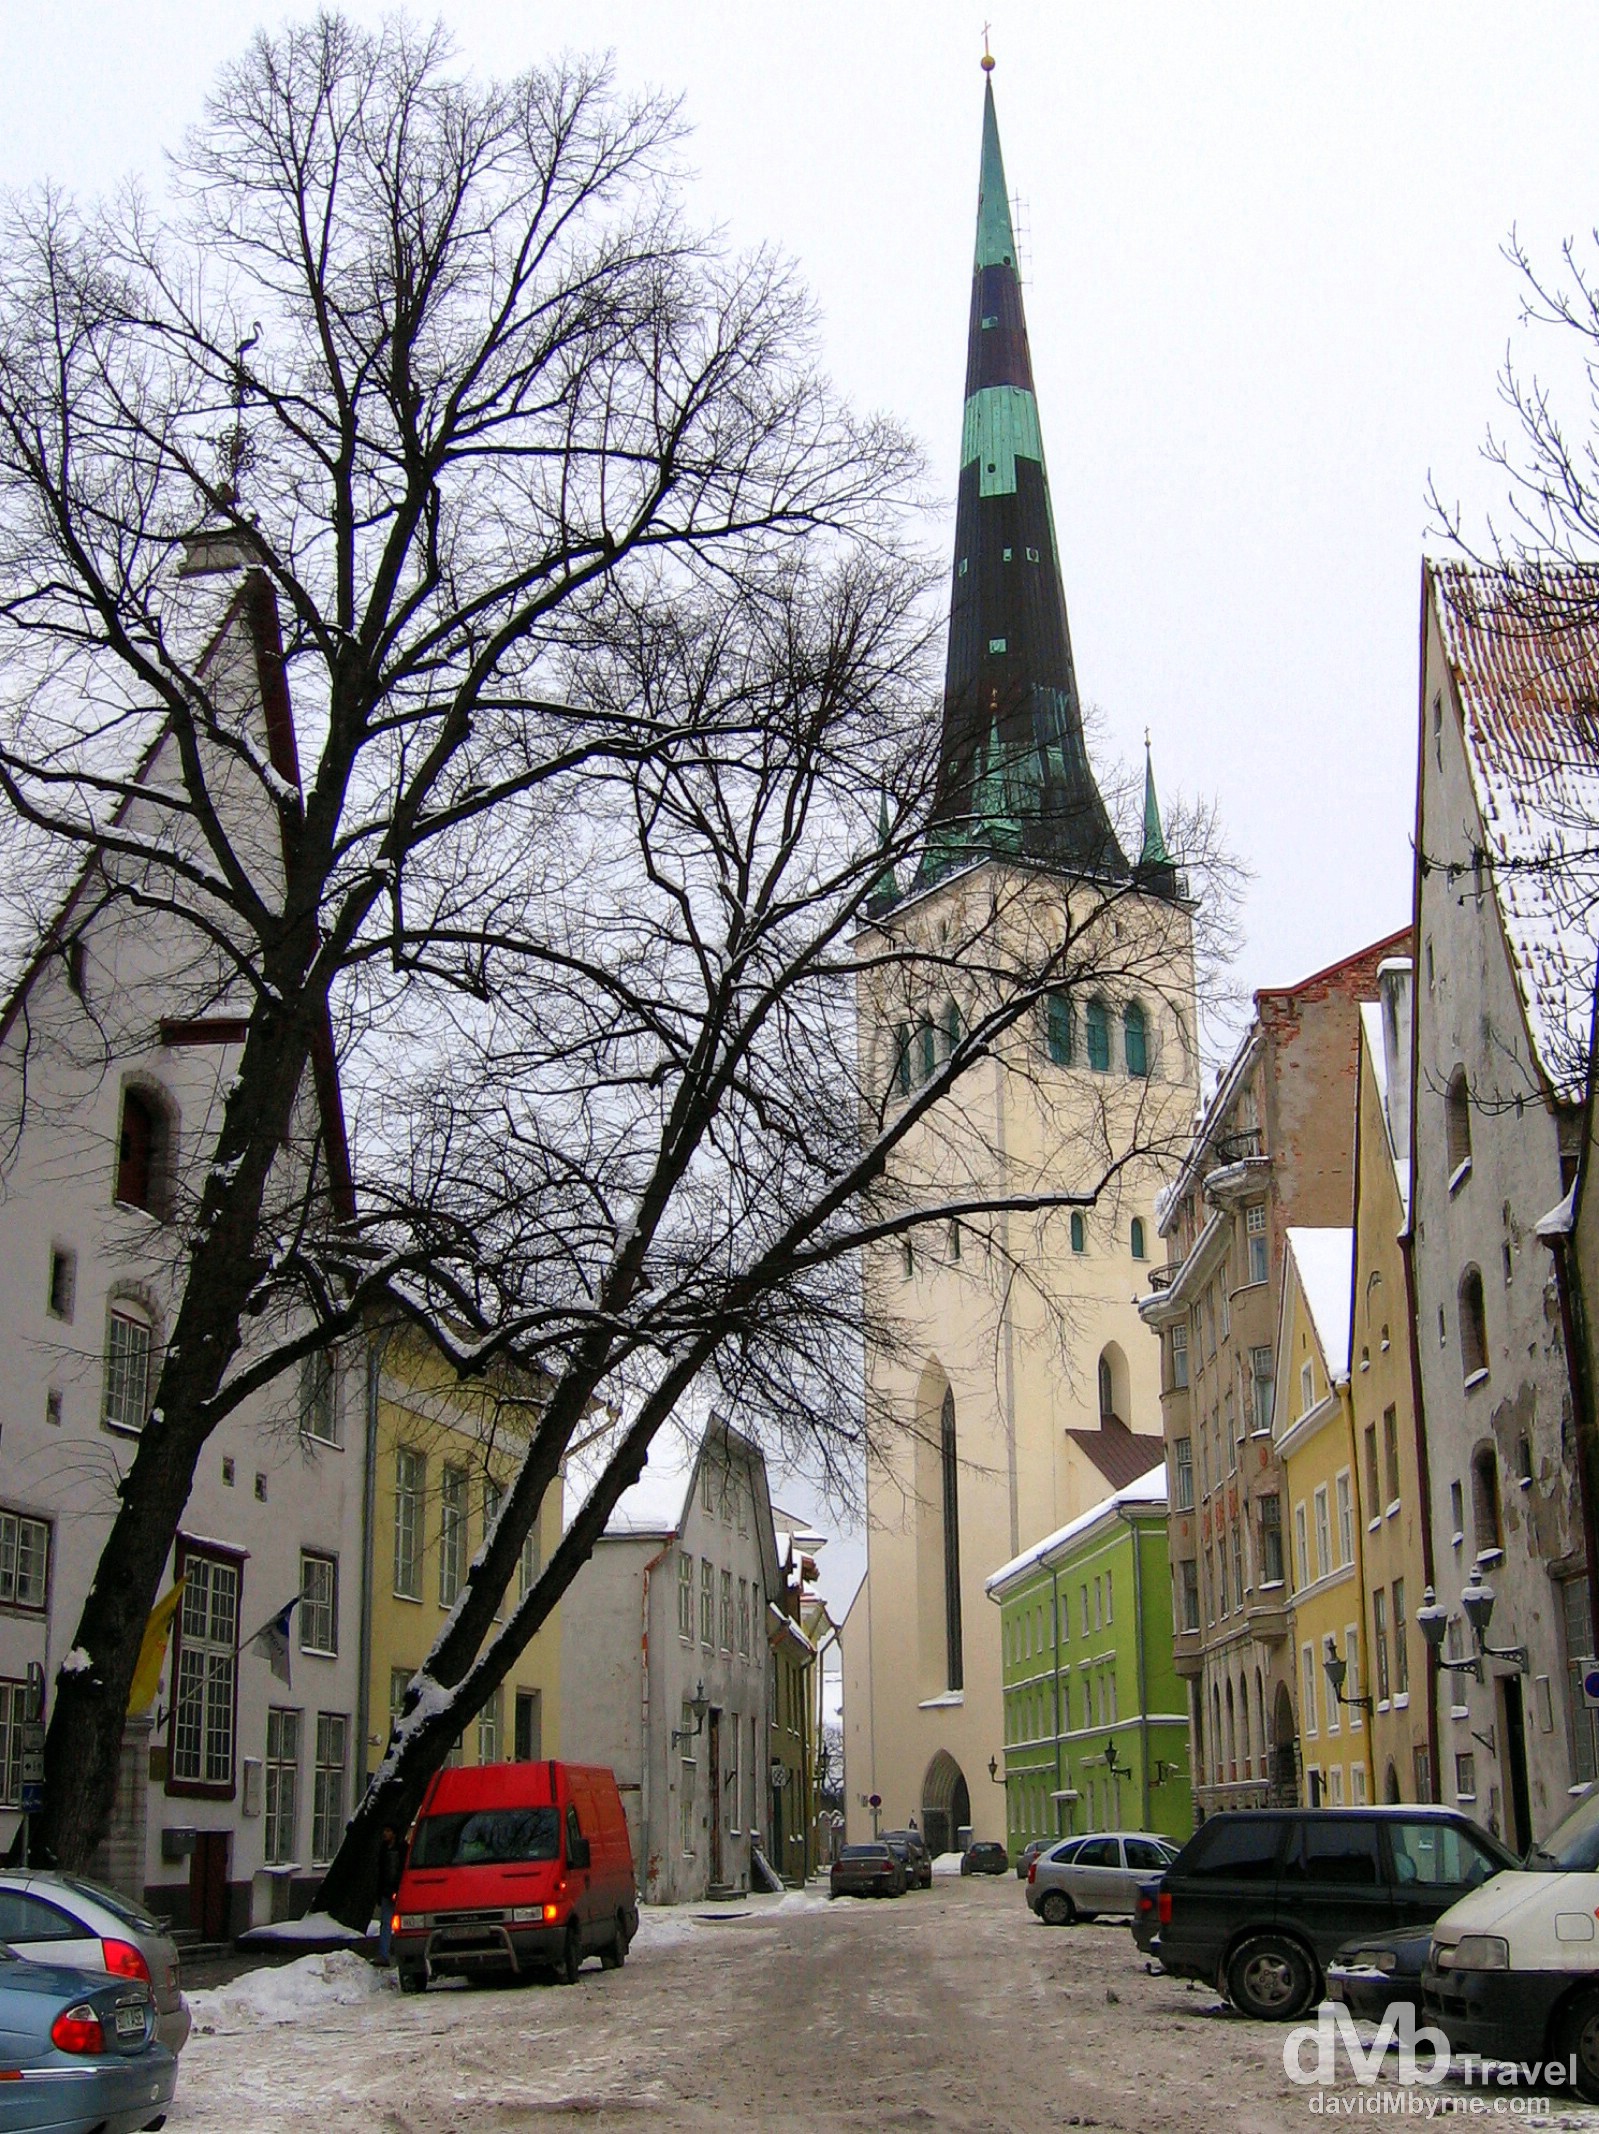 The Oleviste Church towering over a  Pikk tanav in the Old Town of Tallinn, Estonia. March 2, 2006.